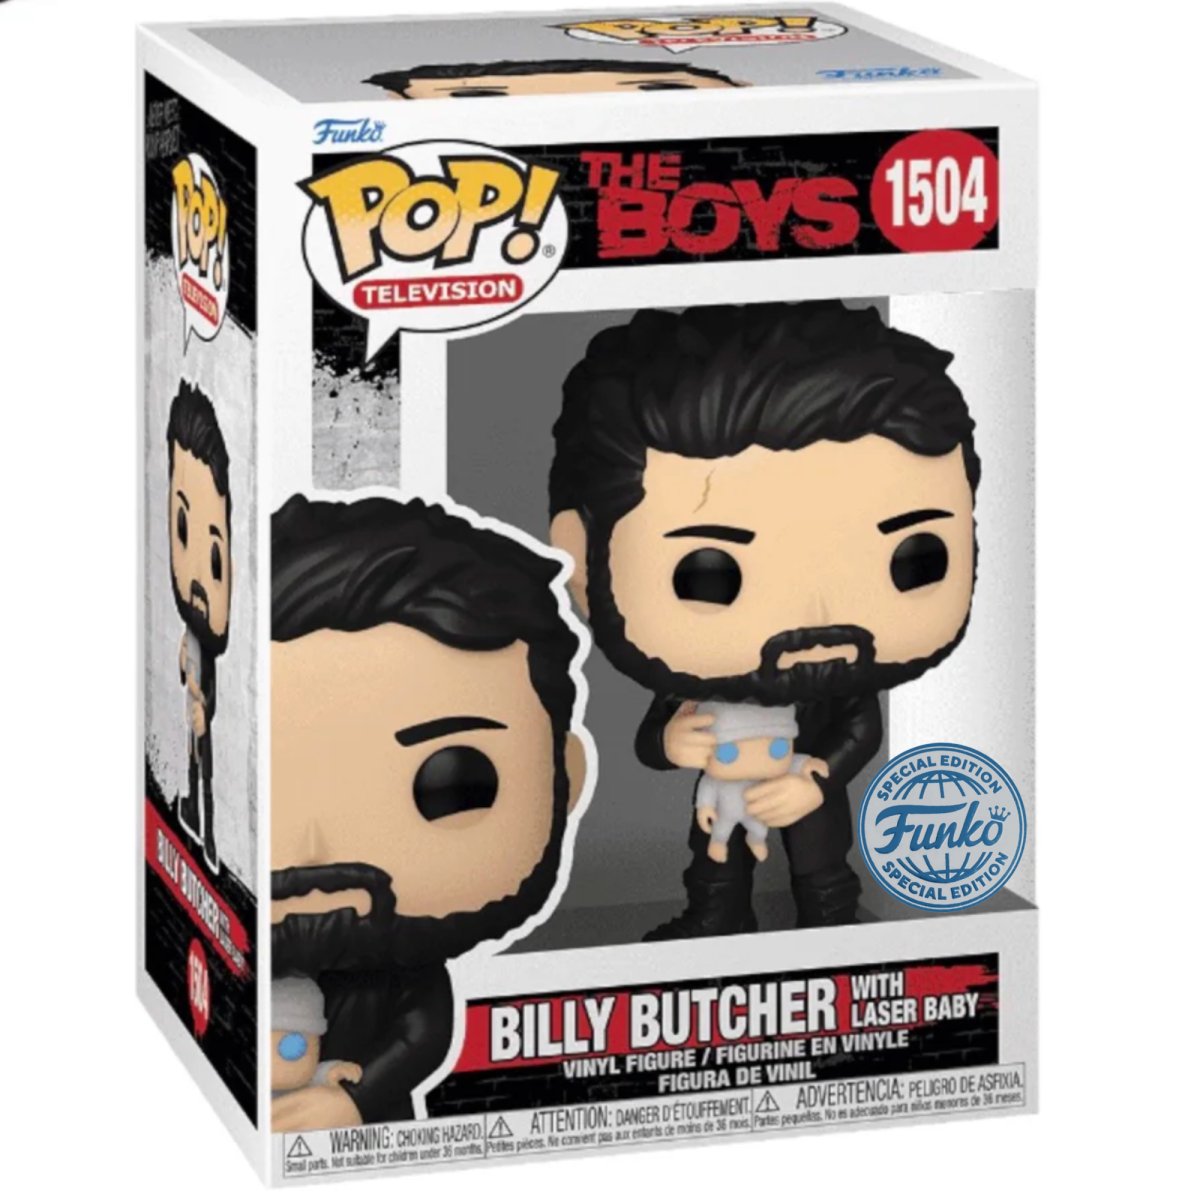 The Boys - Billy Butcher with Laser Baby (Special Edition) #1504 - Funko Pop! Vinyl Television - Persona Toys